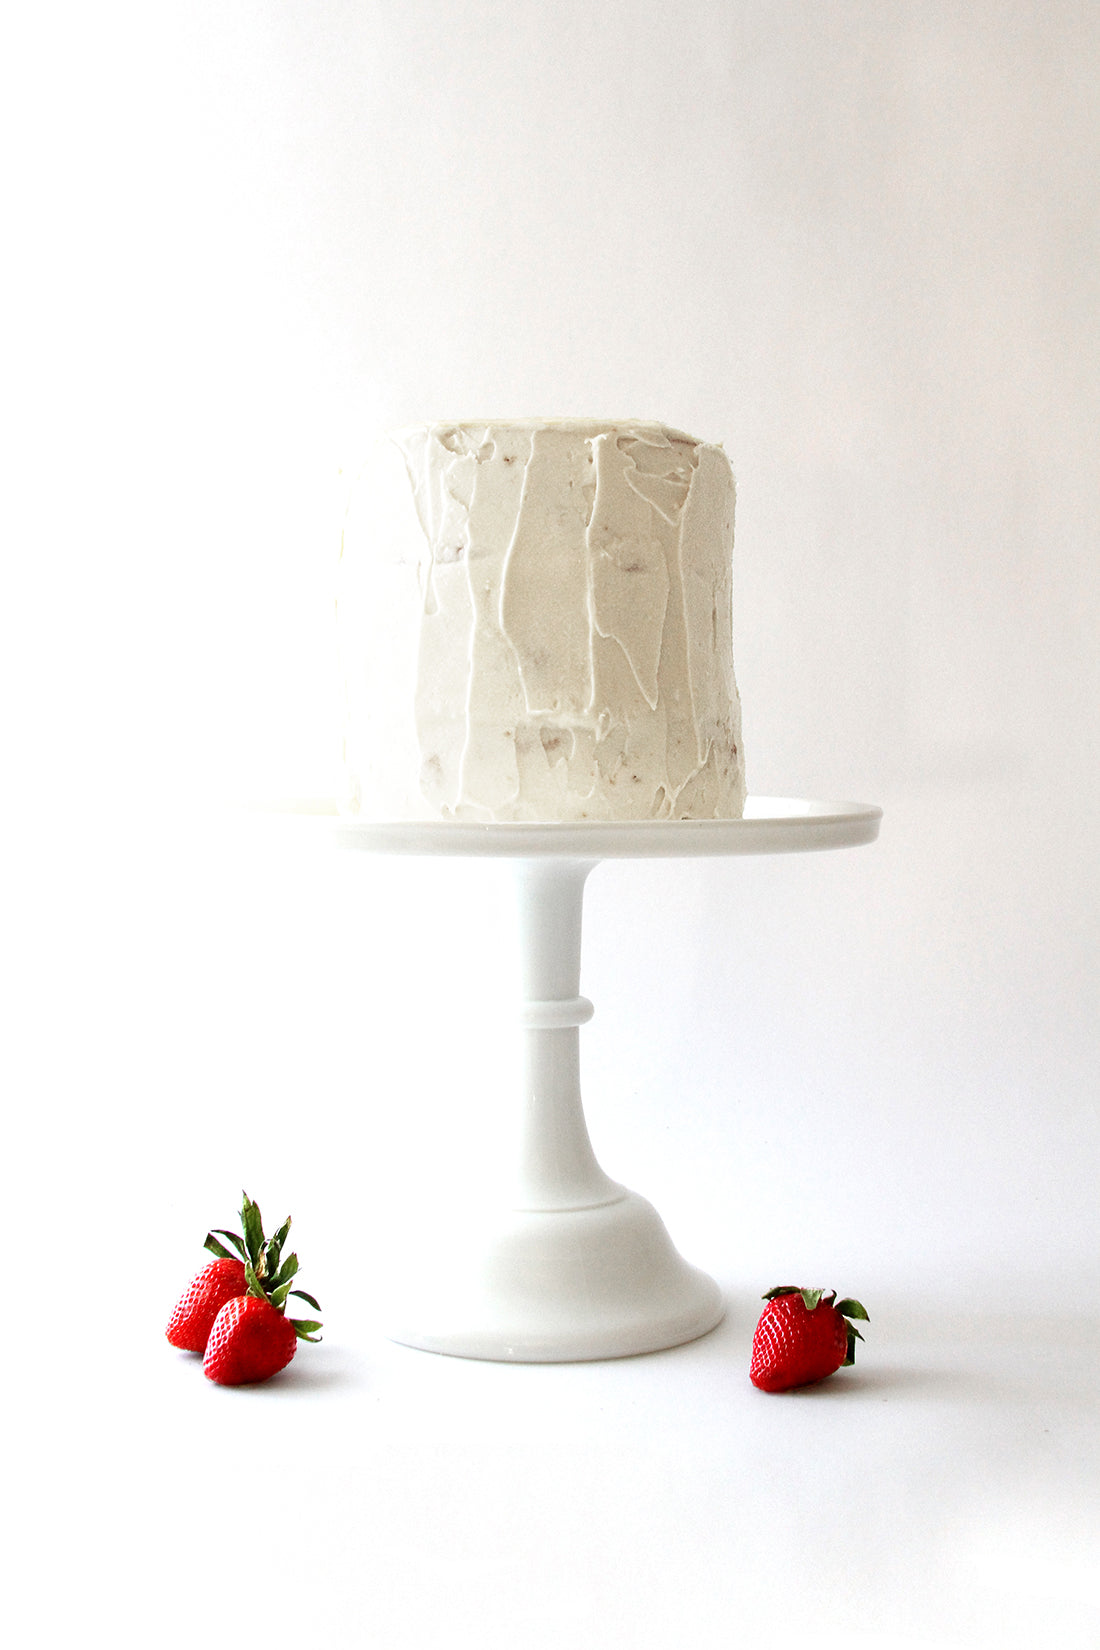 Image of cake stand with Miss Jones California Strawberry Cake on top and three strawberries surrounding the base of the stand.